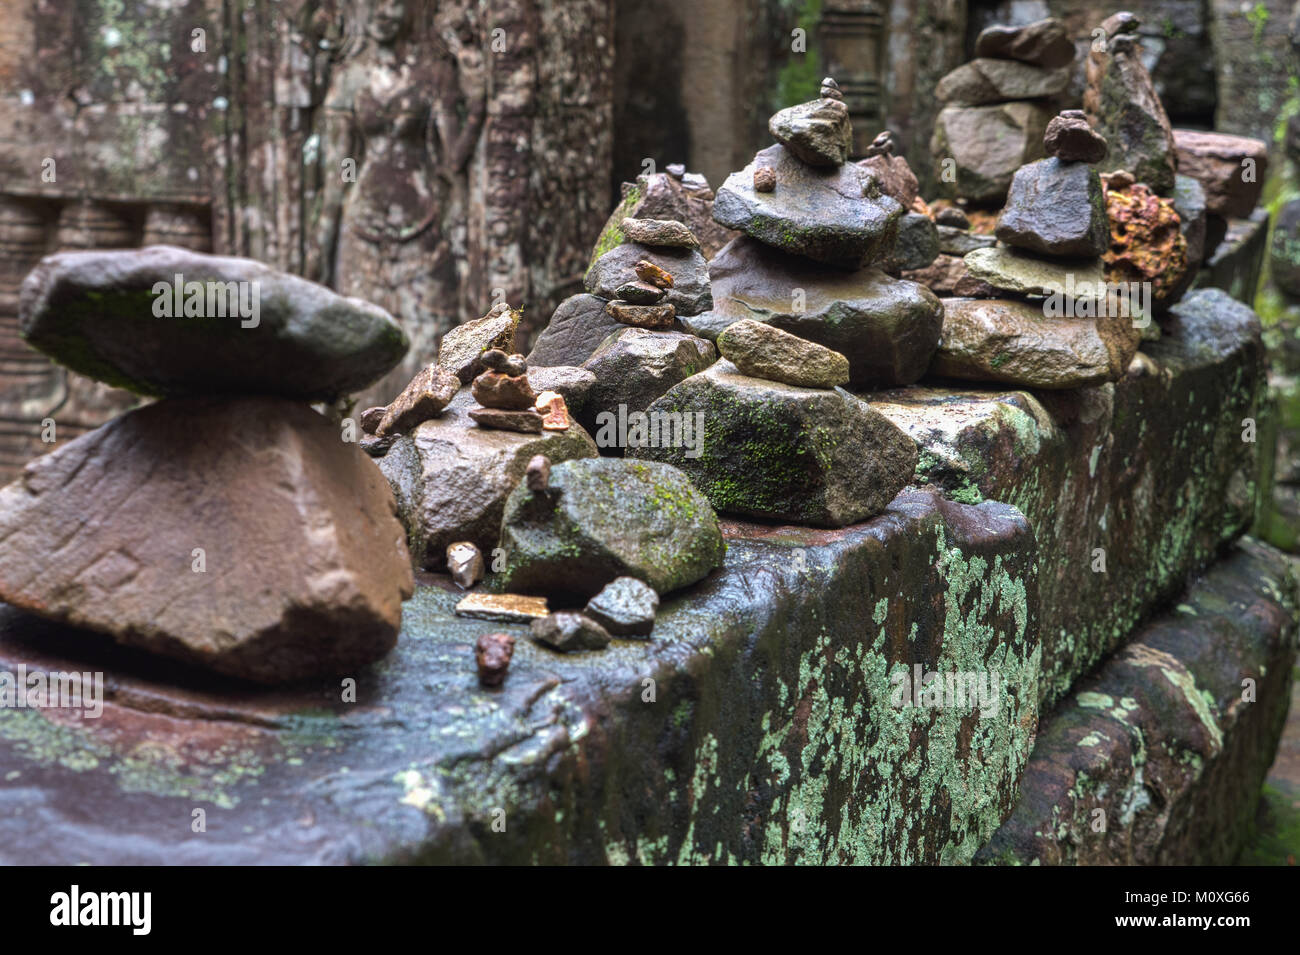 Tempio Bayon rocce impilate a Angkor Thom in Siem Reap, Cambogia Foto Stock